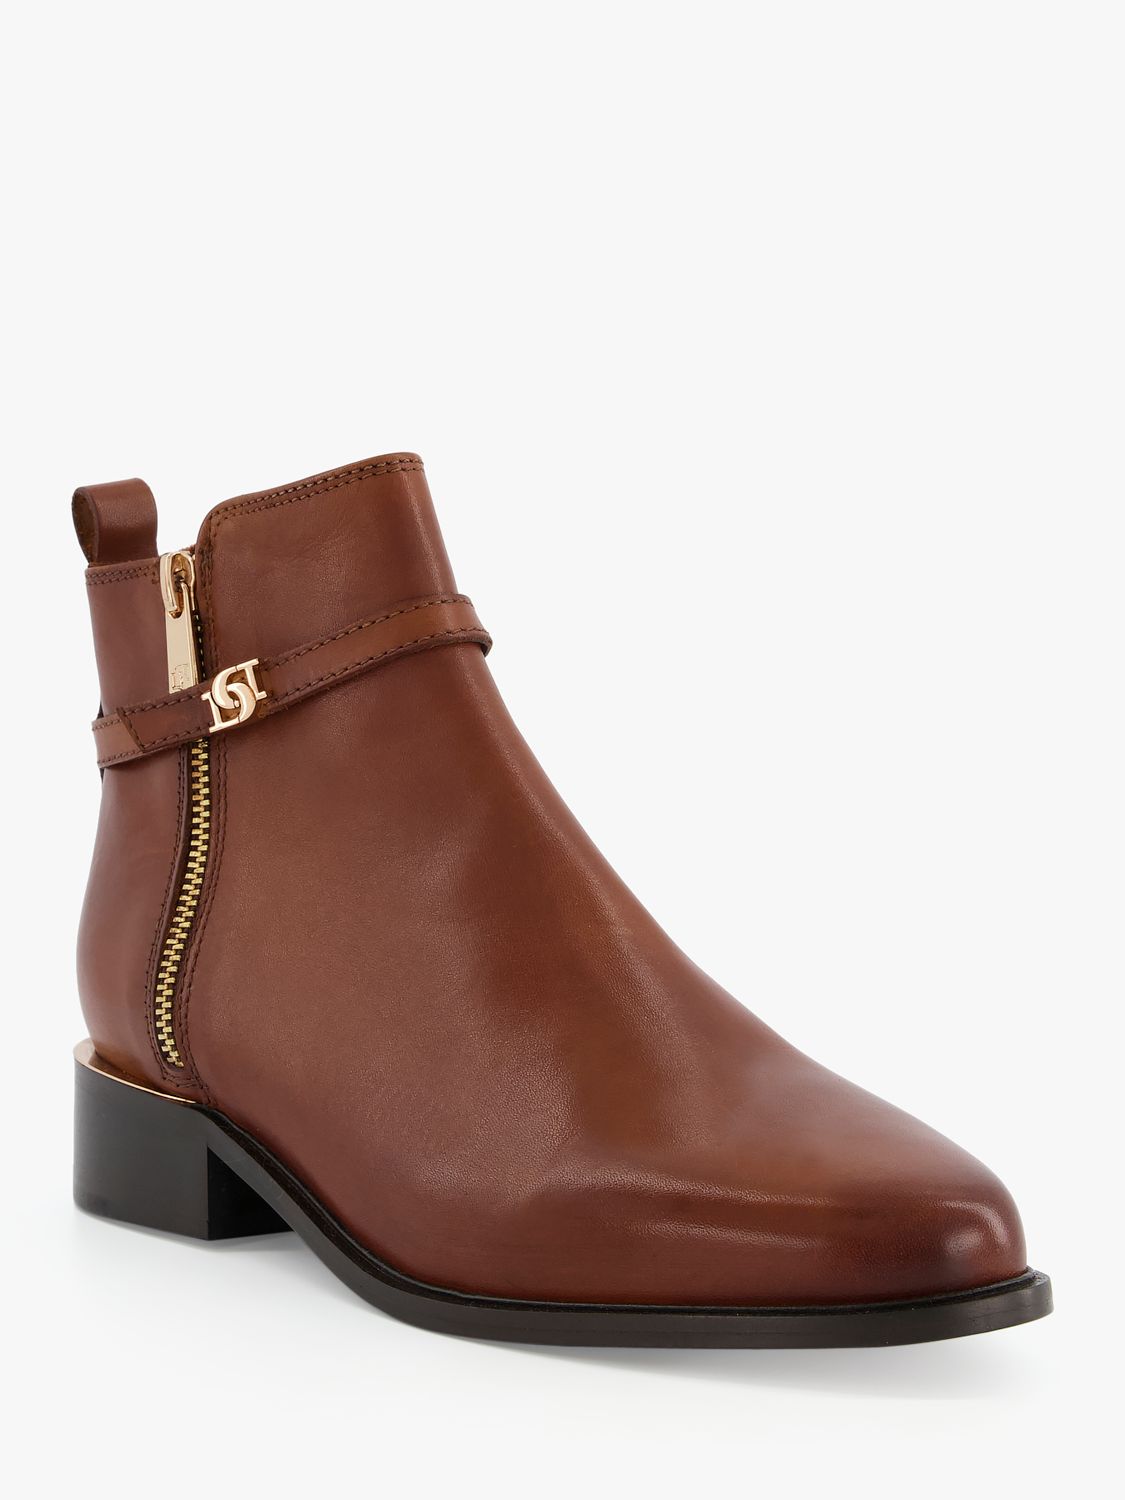 Dune Wide Fit Pap Leather Ankle Boots, Tan at John Lewis & Partners